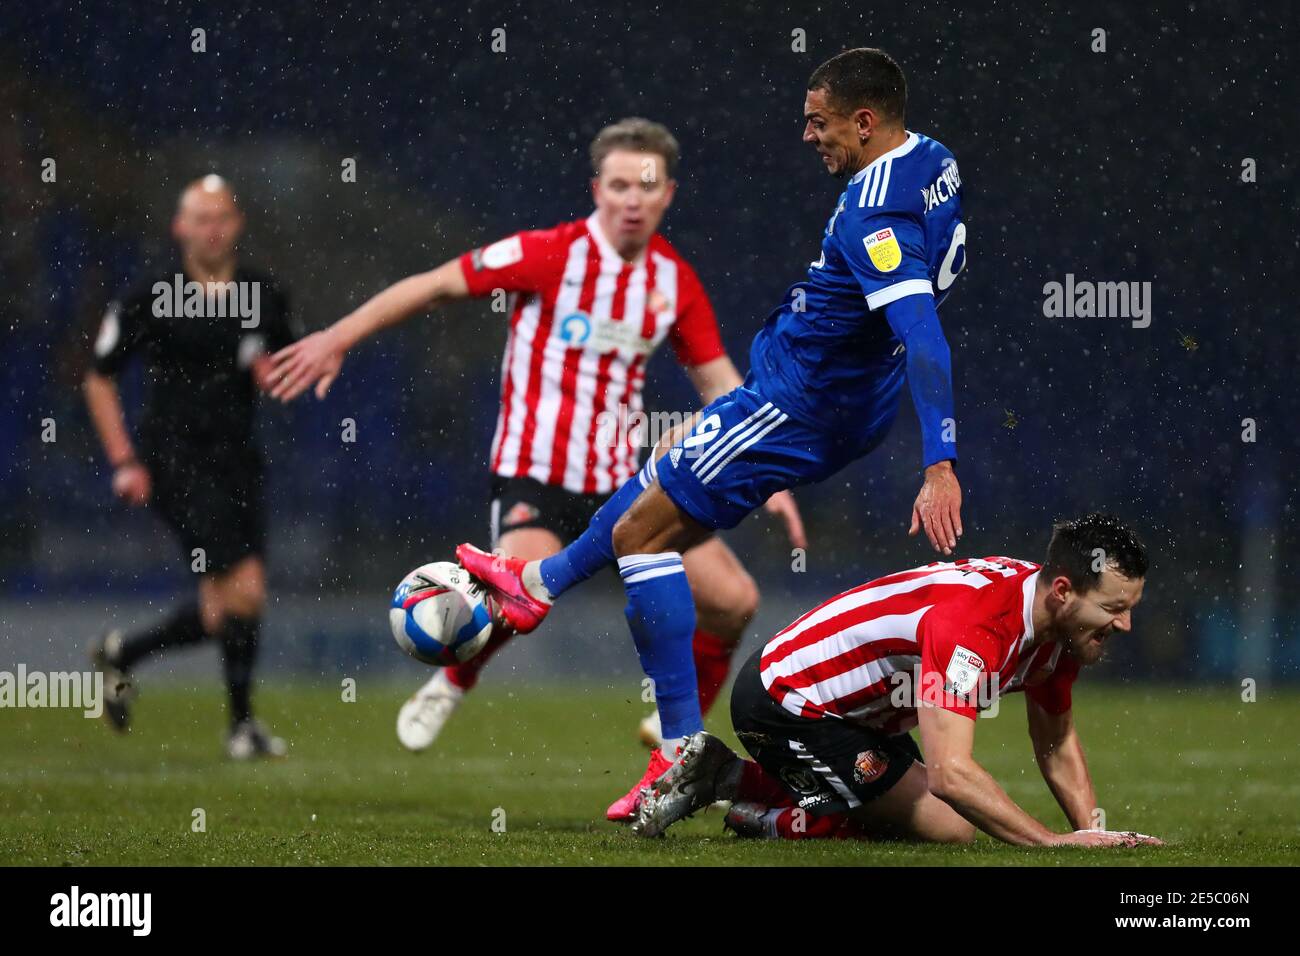 Kayden Jackson of Ipswich Town clashes with Bailey Wright of Sunderland before receiving a red card for violent conduct - Ipswich Town v Sunderland, Sky Bet League One, Portman Road, Ipswich, UK - 26th January 2021  Editorial Use Only - DataCo restrictions apply Stock Photo